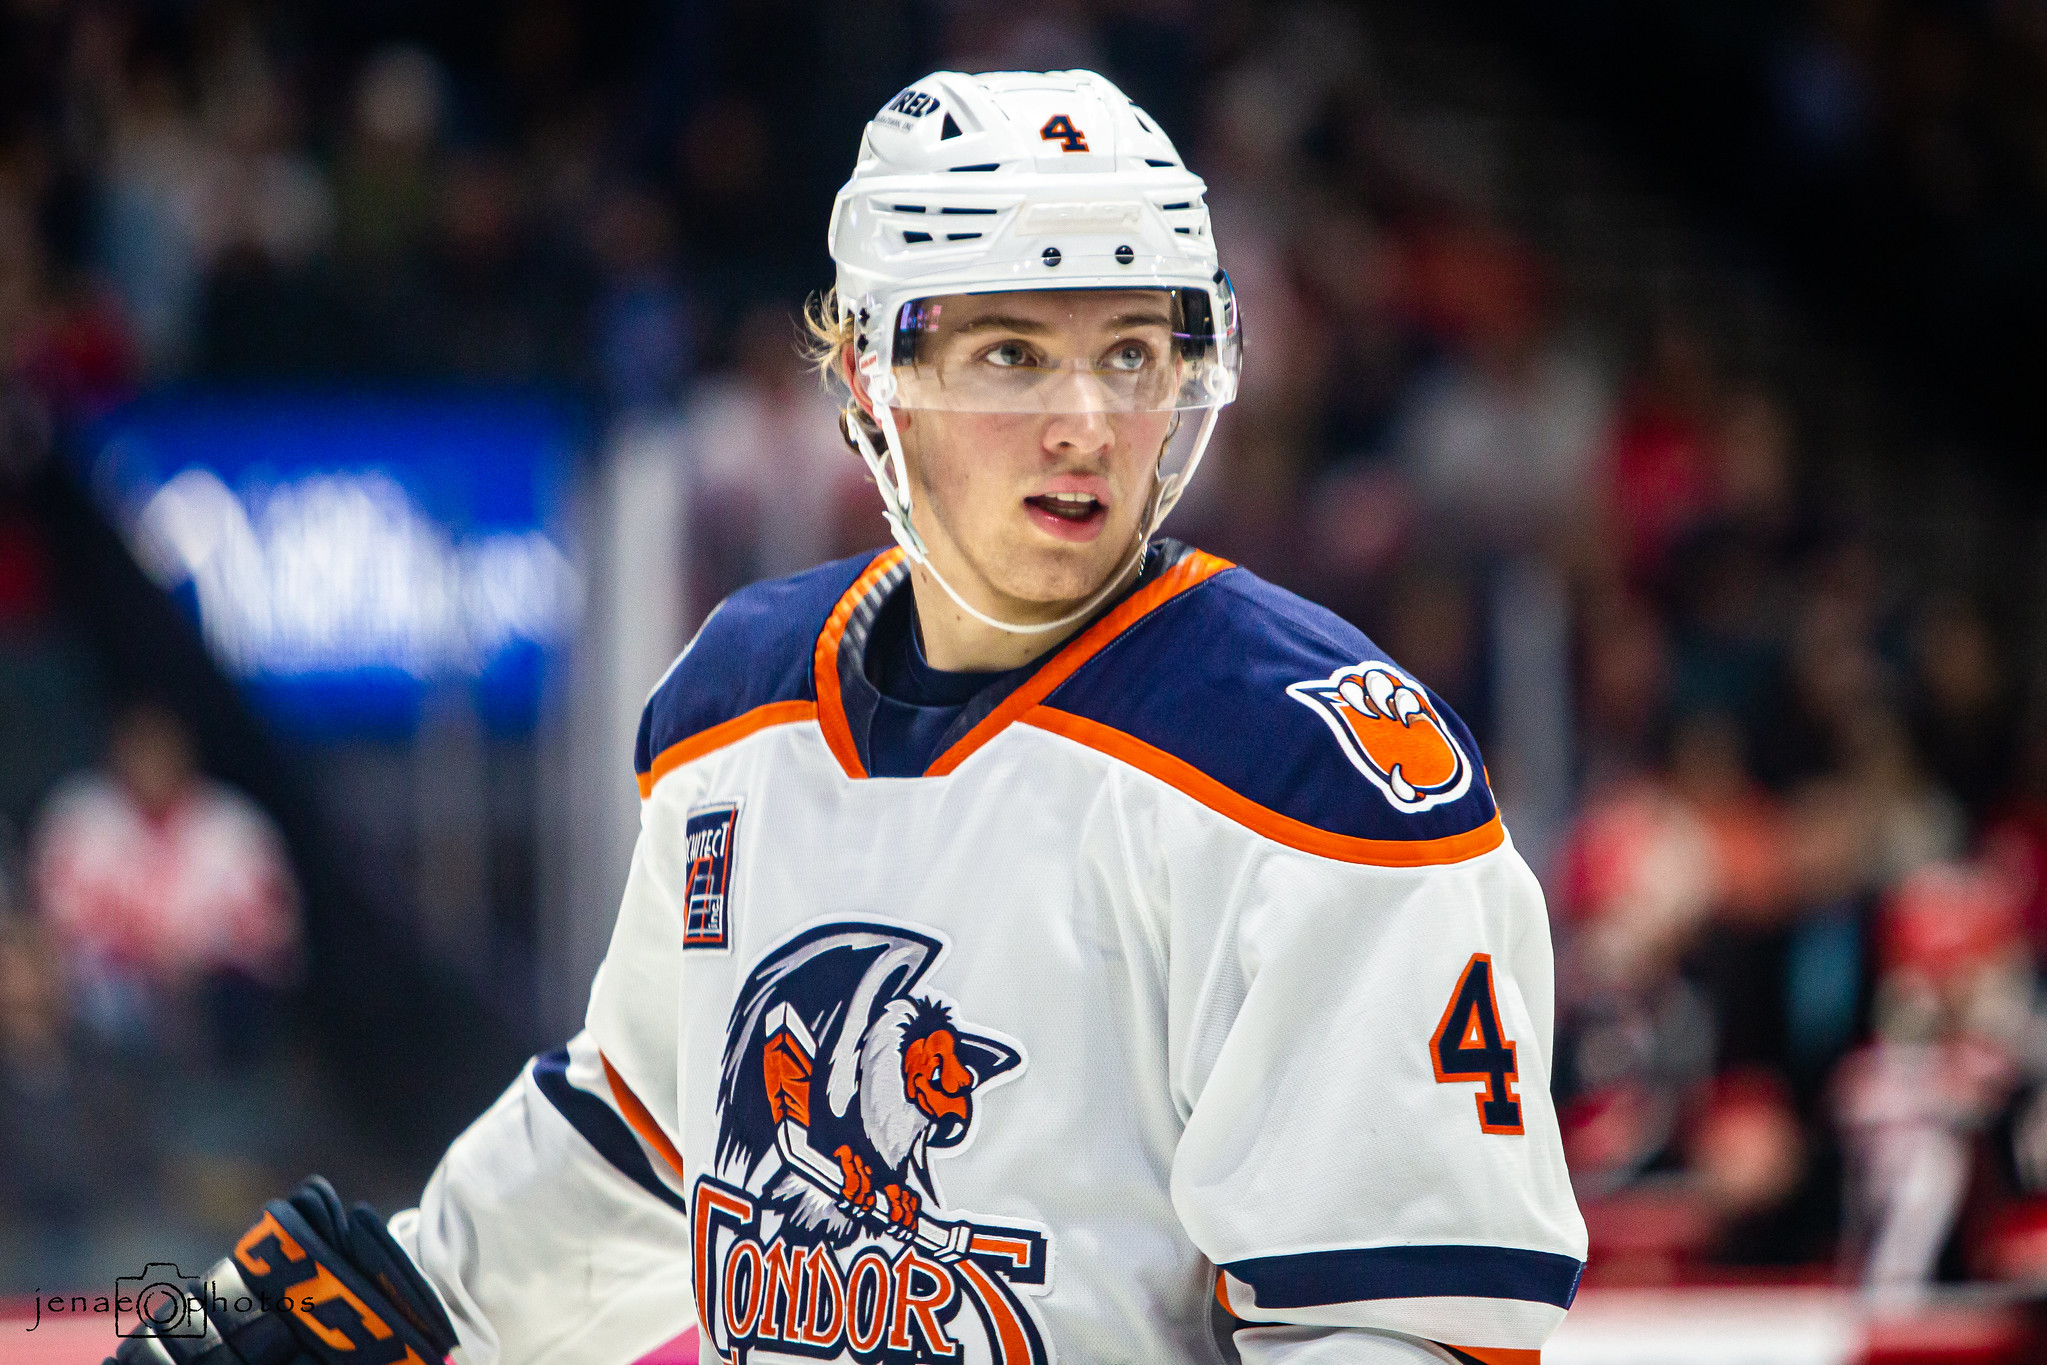 Oilers' Signee Noah Philp Brings Strong Work Ethic to the System